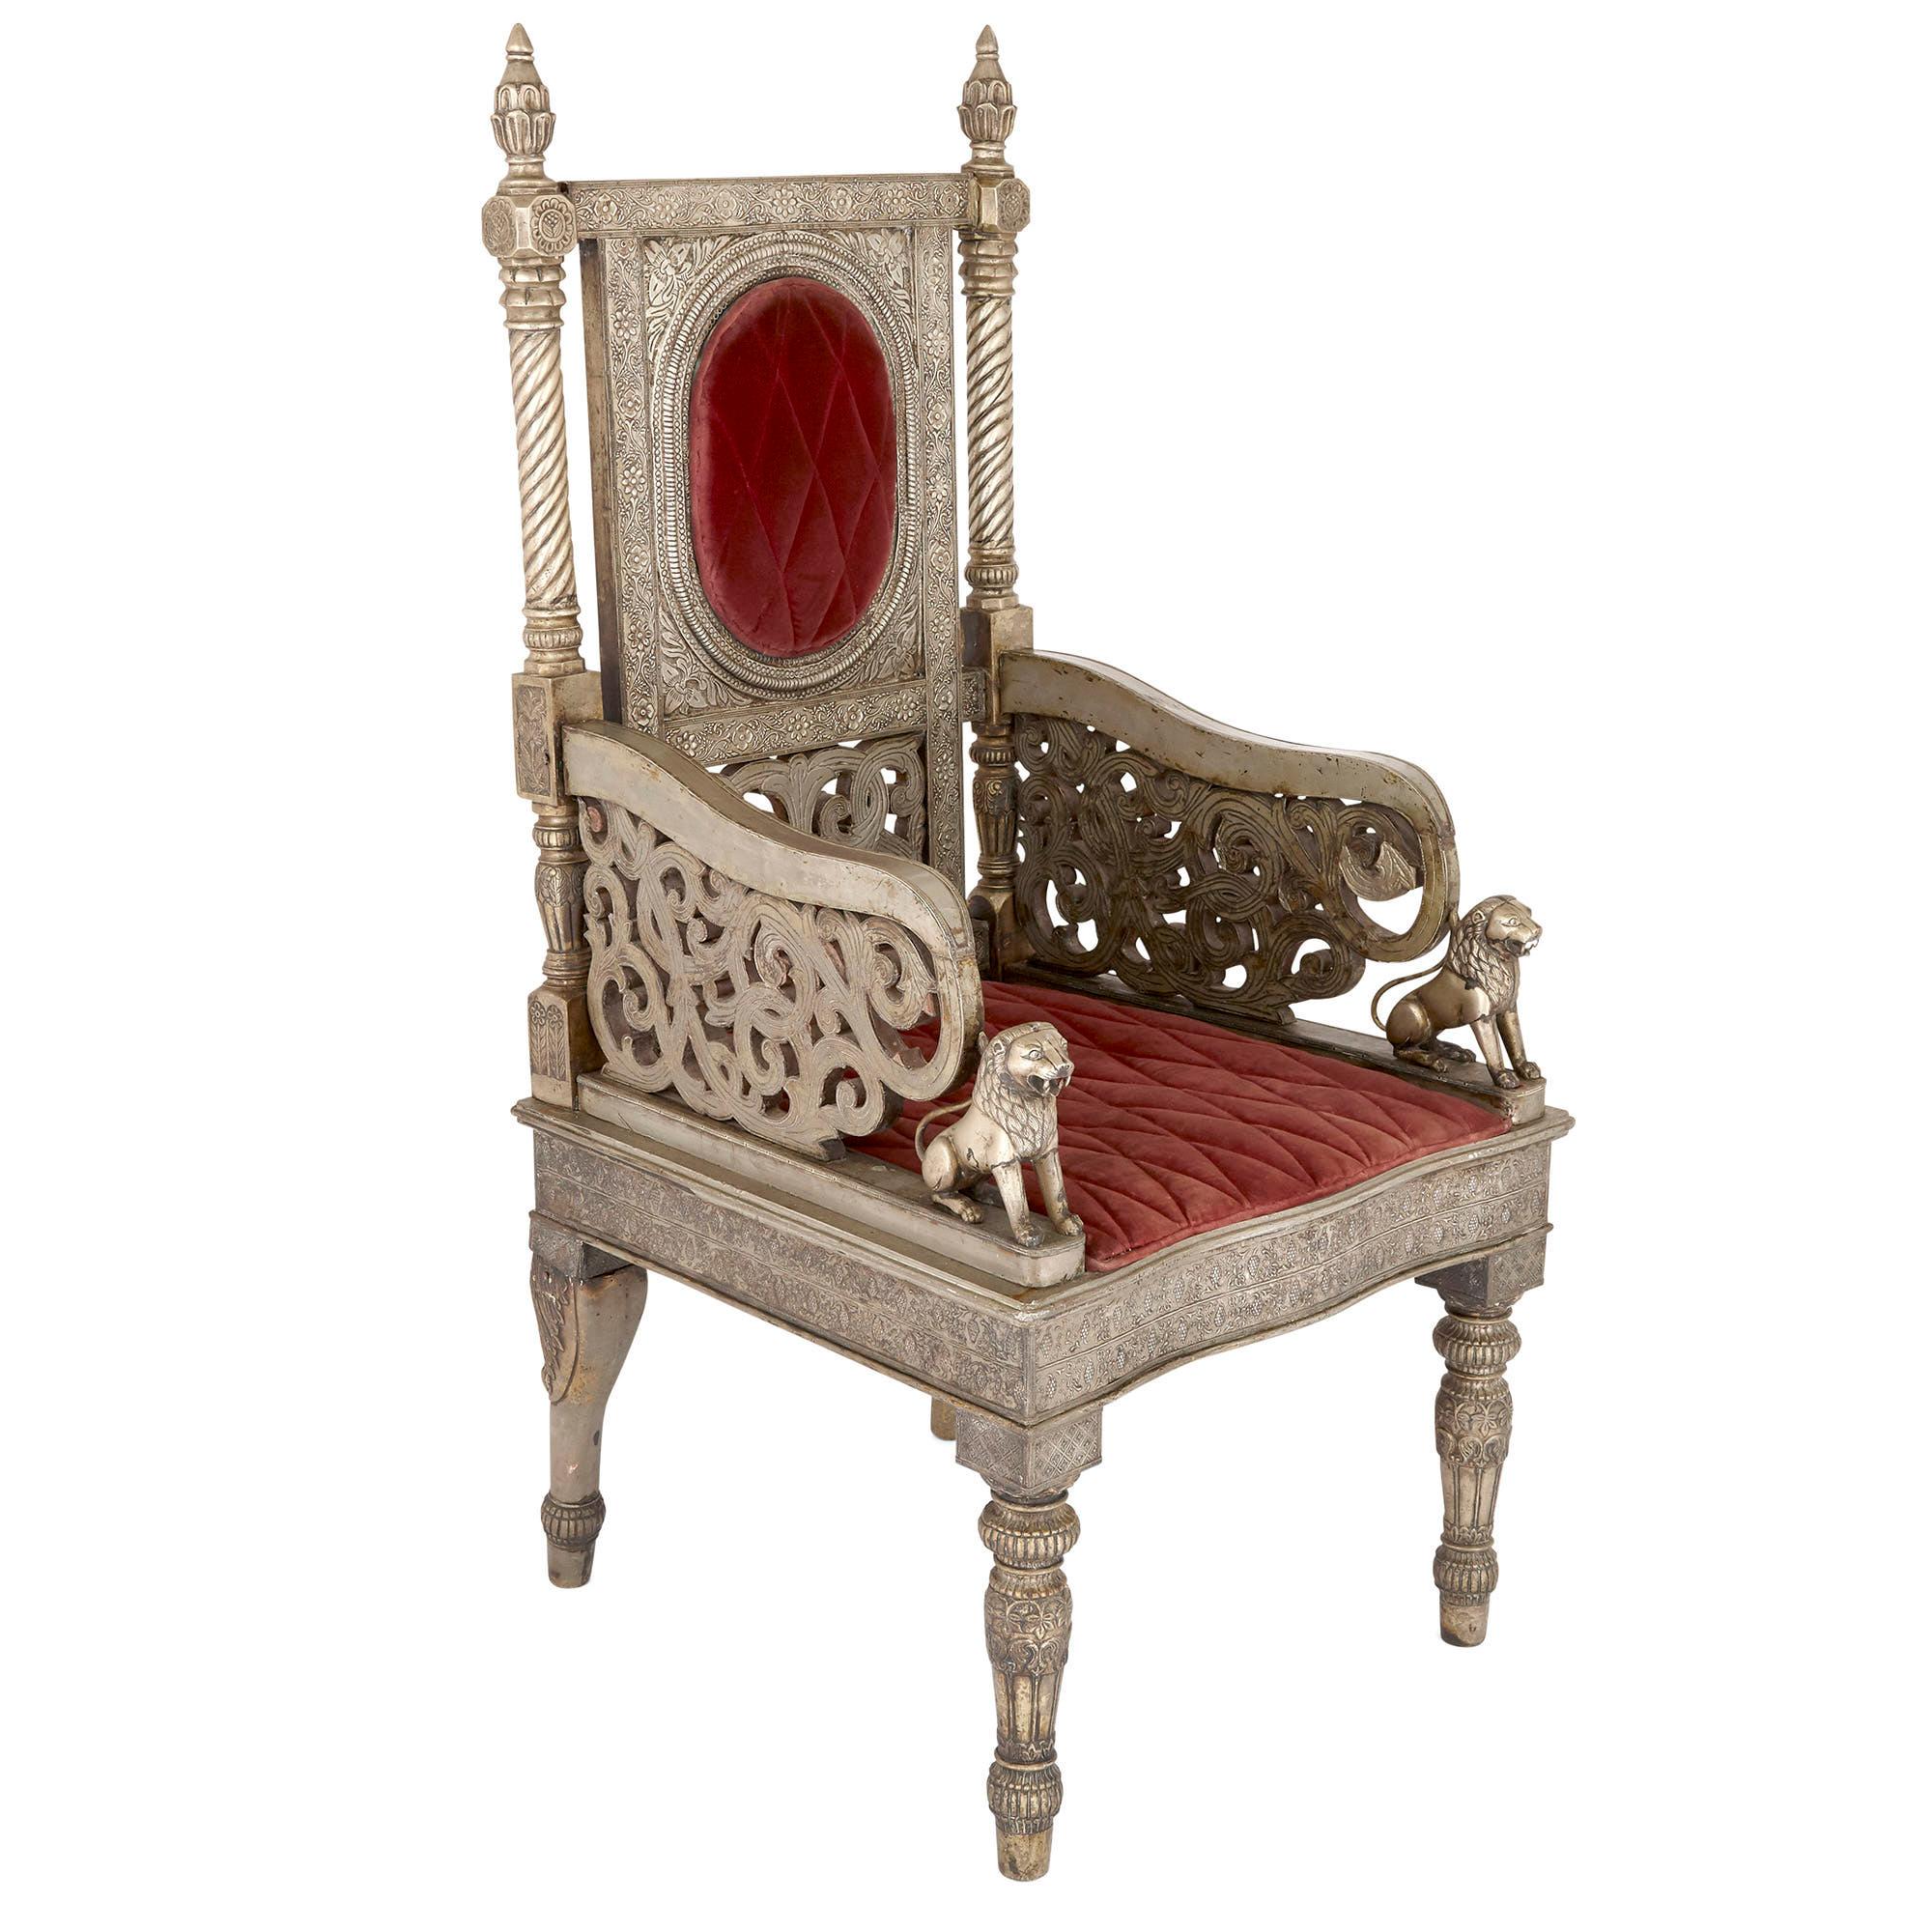 Silvered metal and red velvet throne chair
Indian, circa 1880
Measures: Height 138cm, width 66cm, depth 66cm

This fine Indian throne chair would have been popular in Europe as well as India in the 19th century. The detailed silvered metal chair